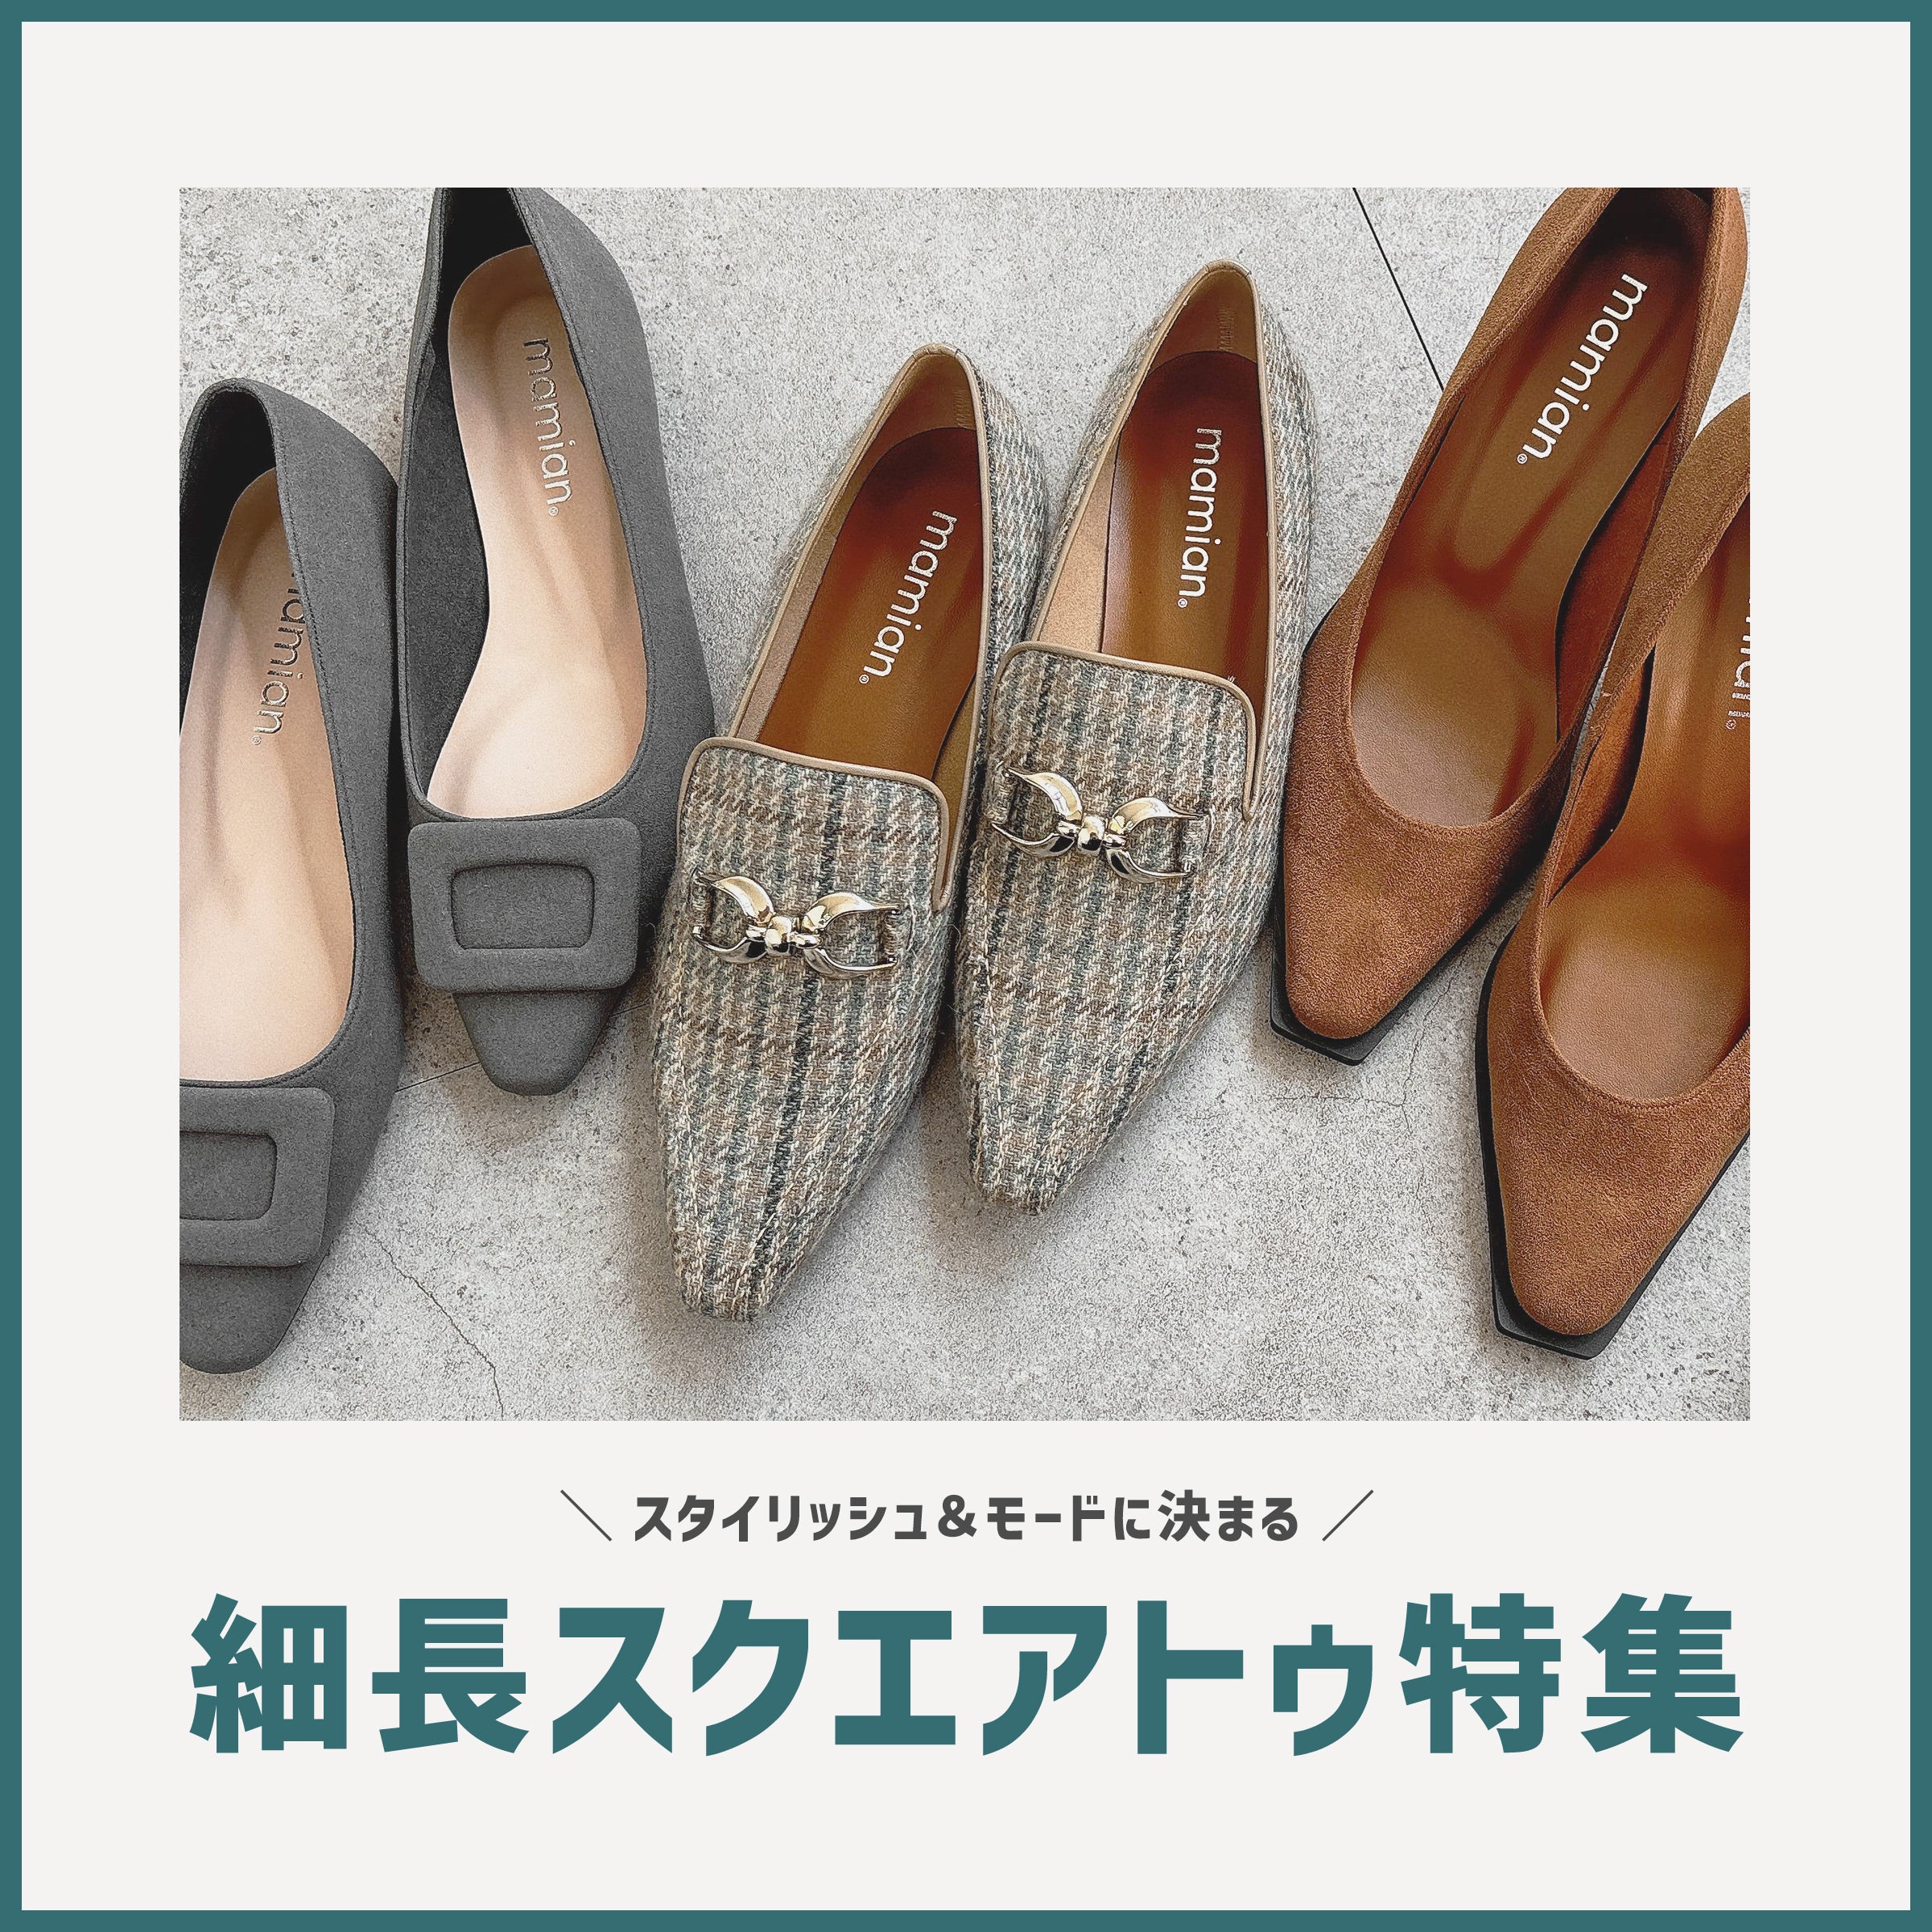 Special feature on elongated square toe shoes